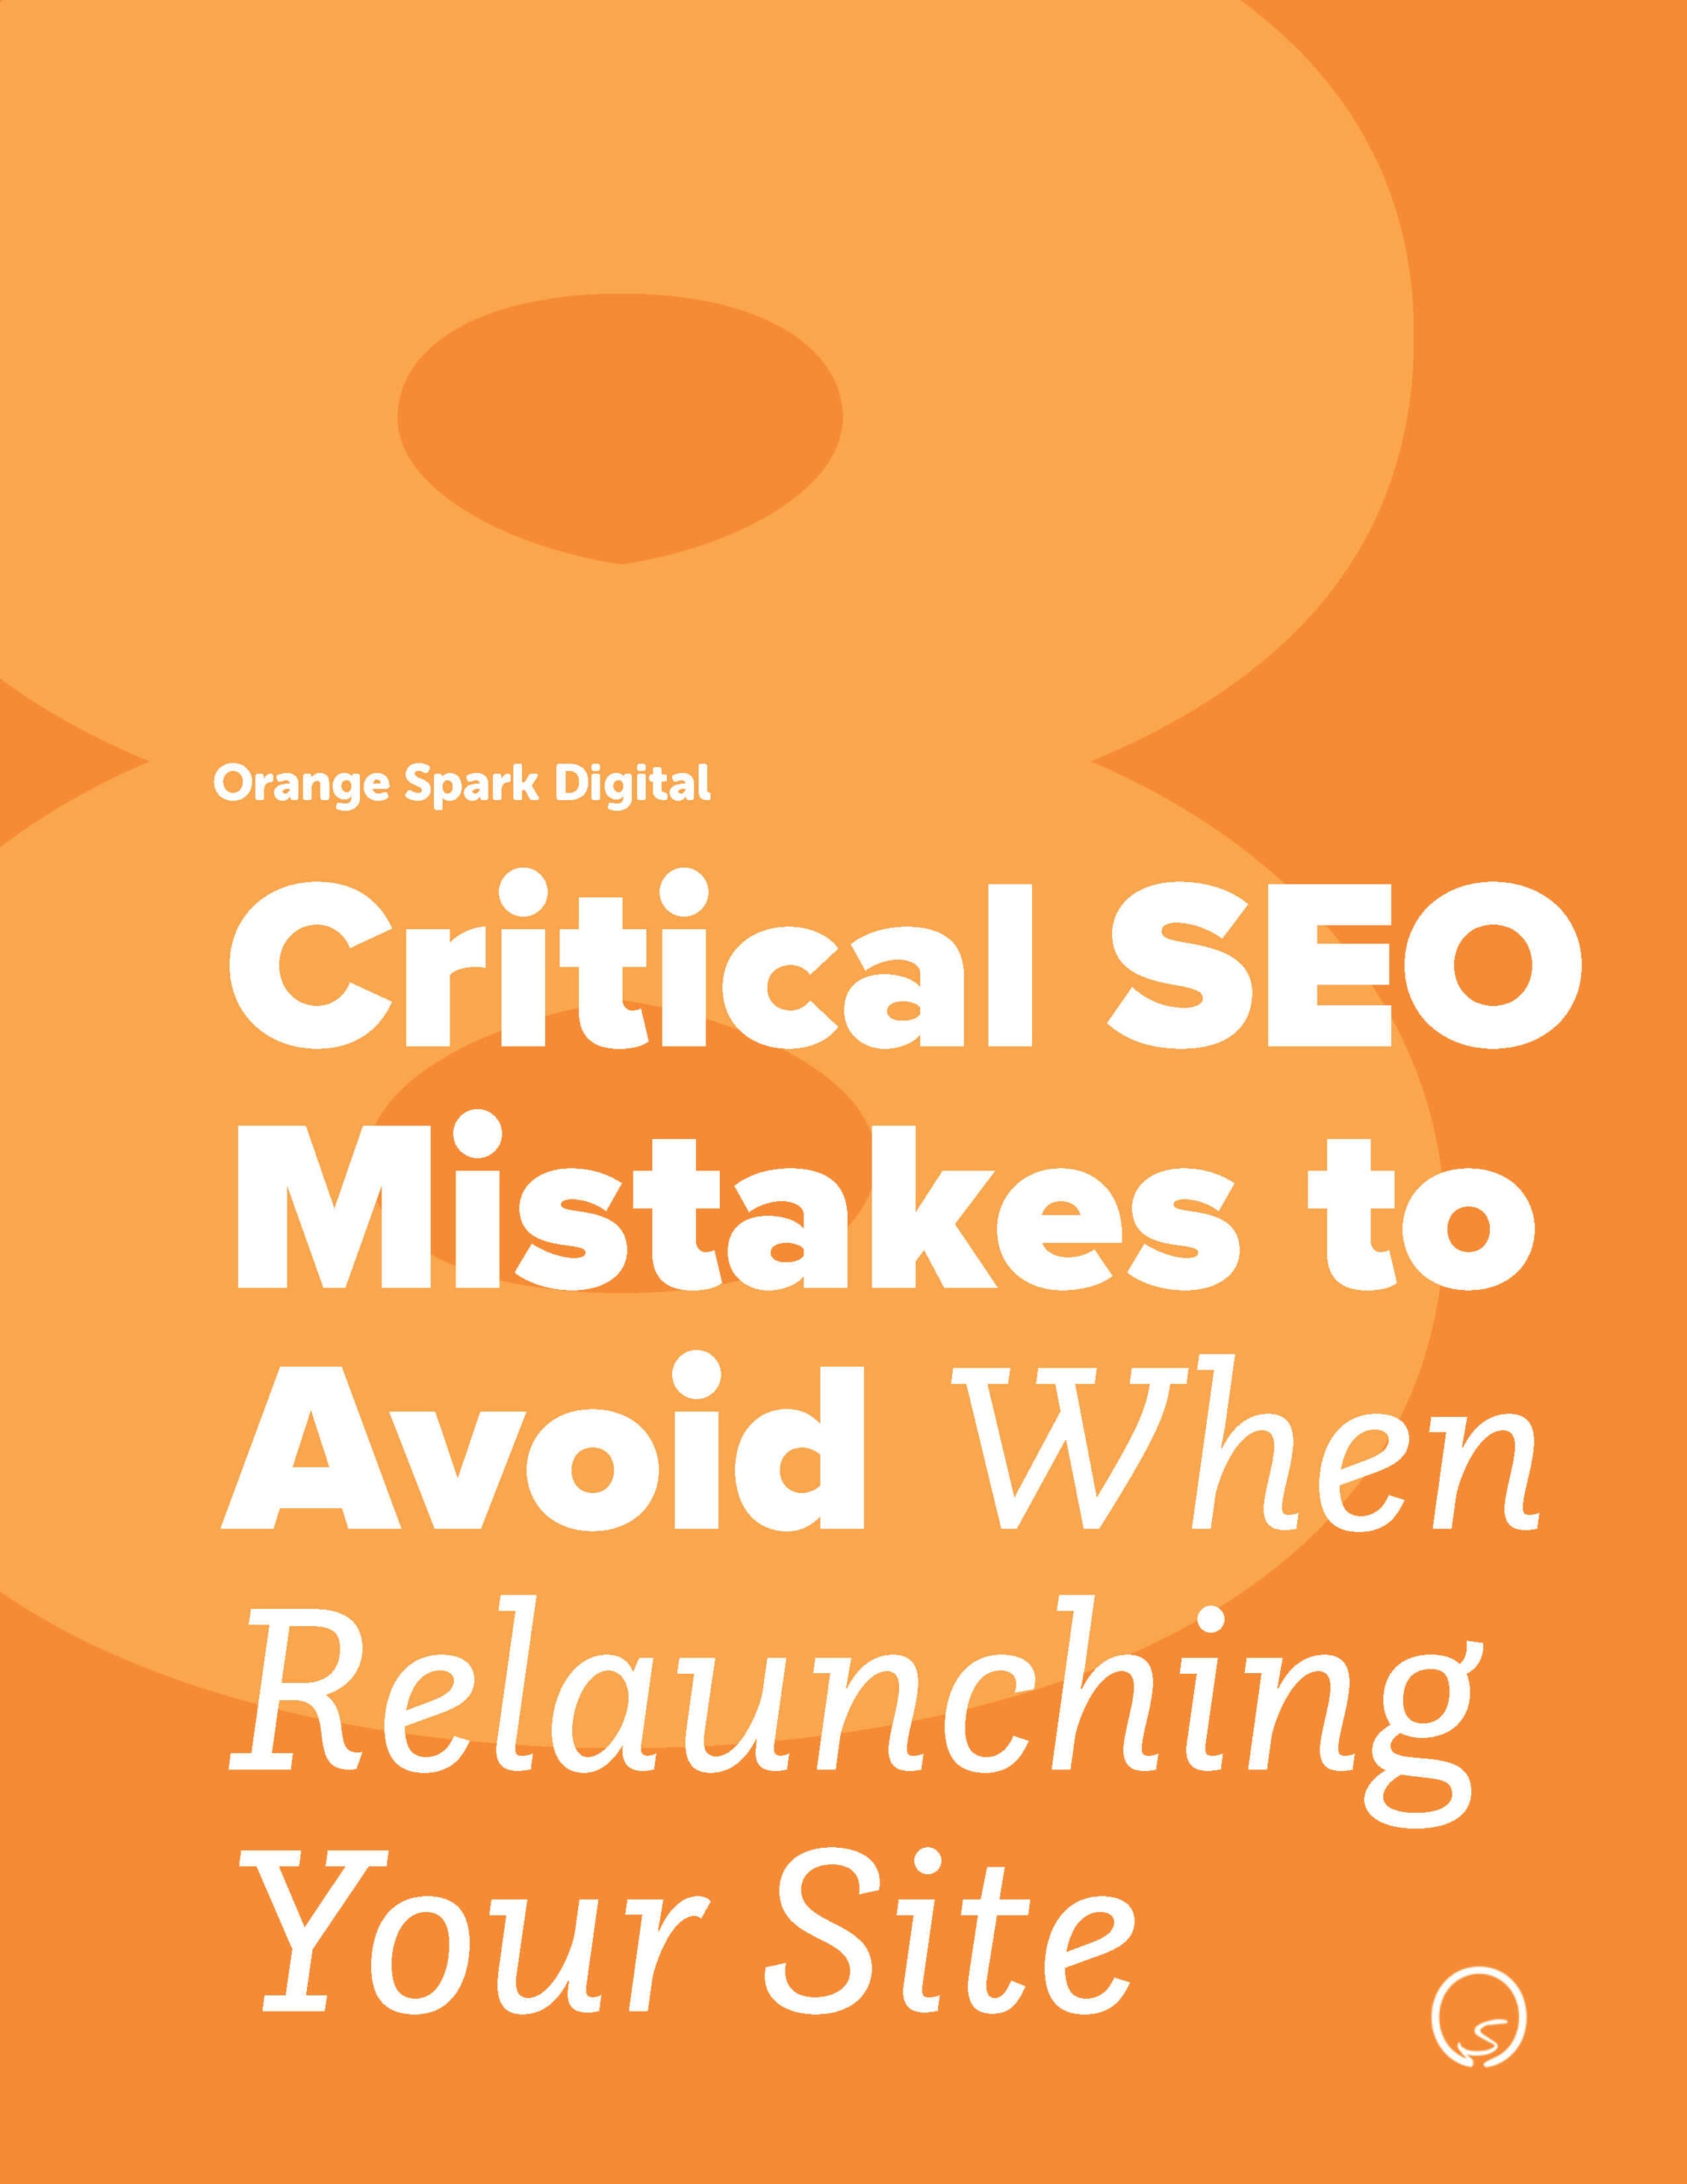 Guide: Critical SEO Mistakes to Avoid When Relaunching Your Site